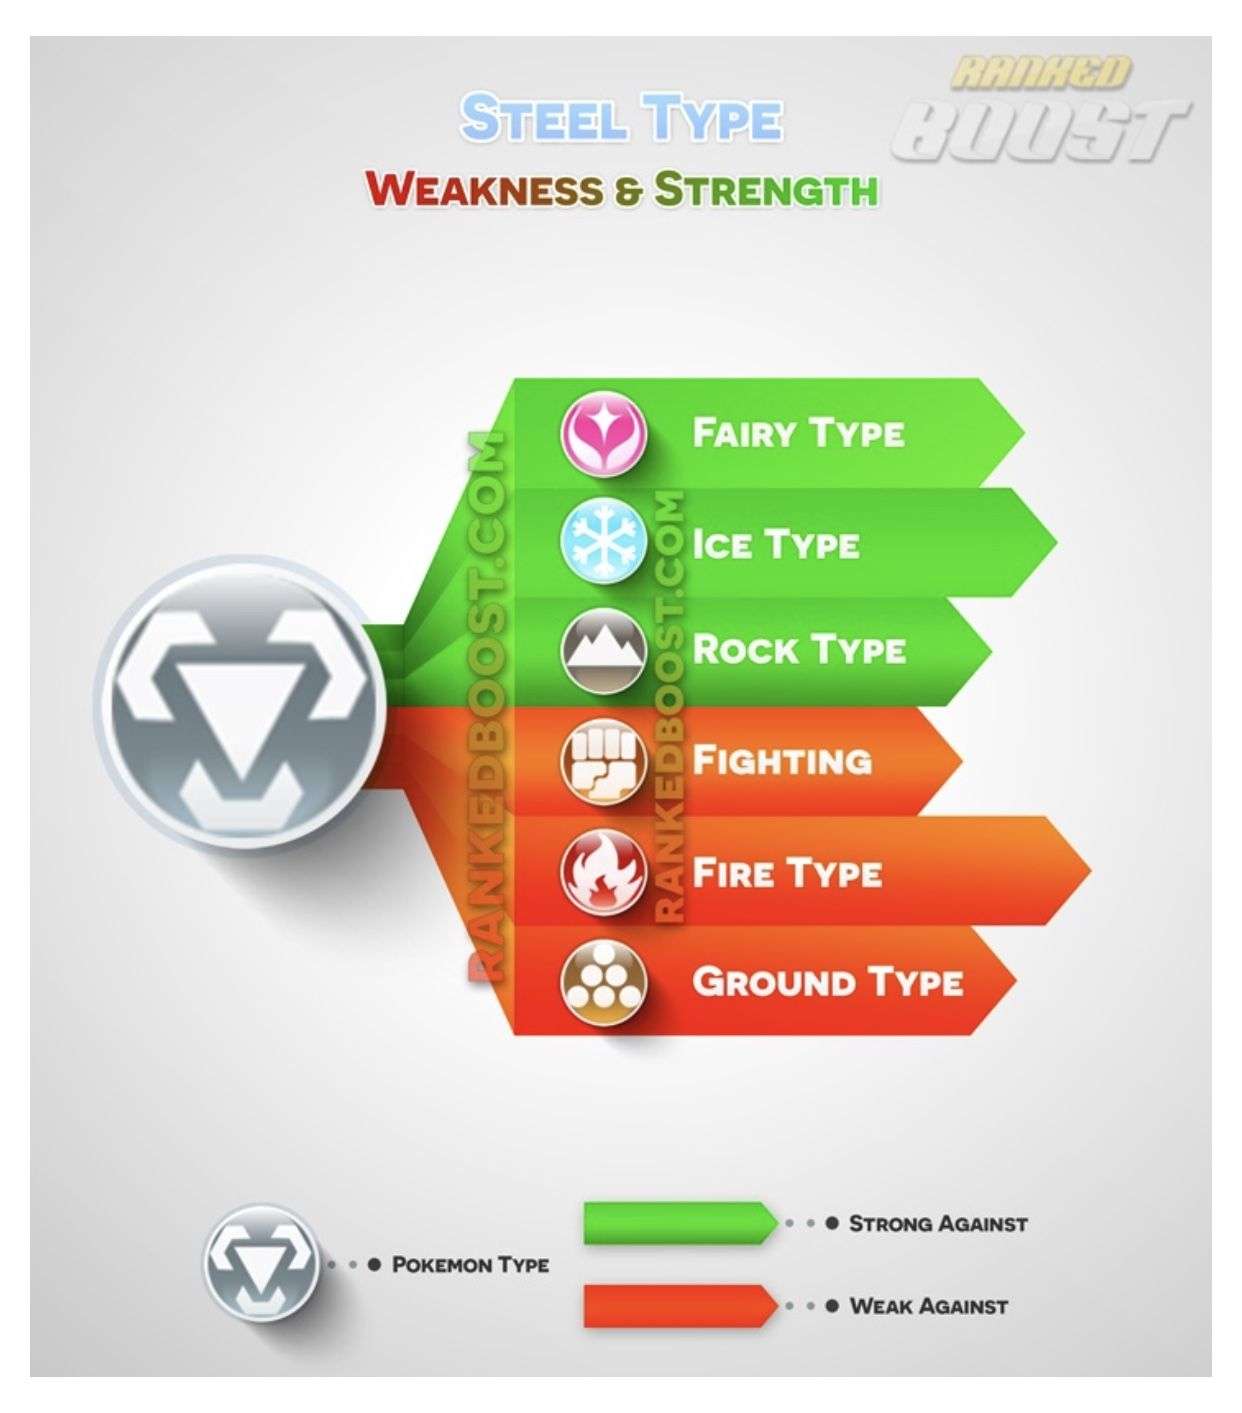 STEEL strengths and weaknesses